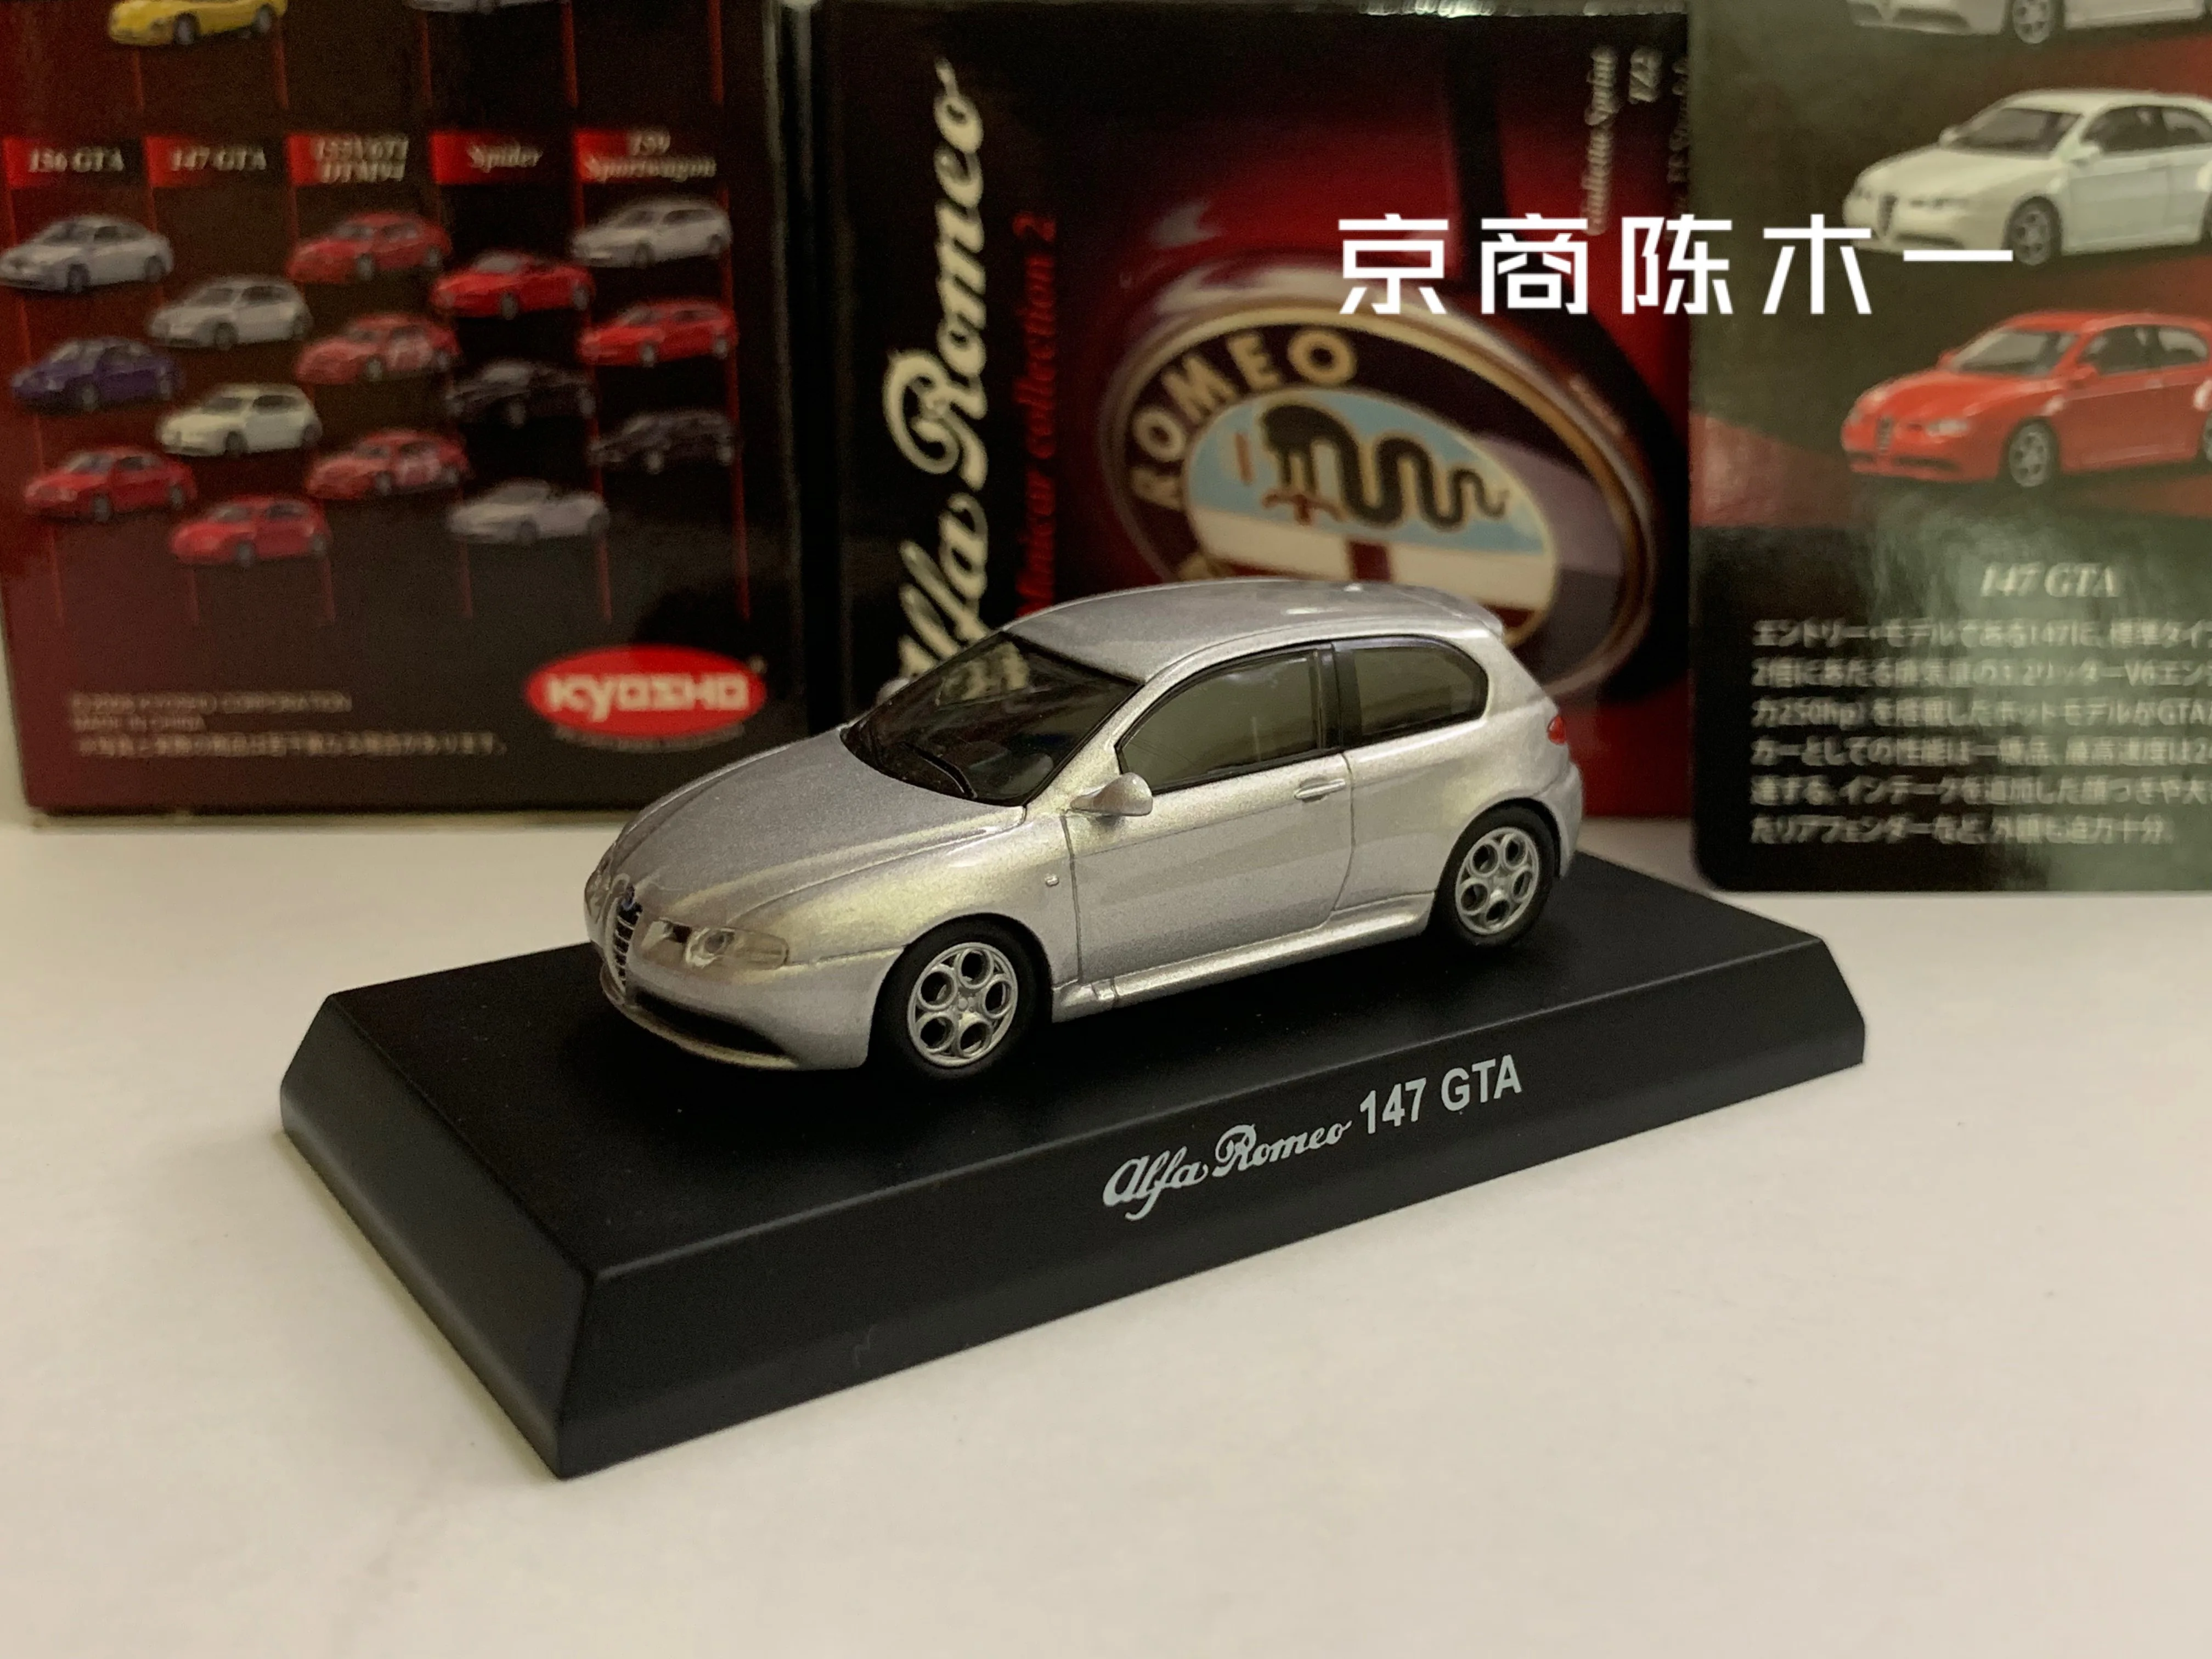 

1/64 KYOSHO Alfa Romeo 147 GTA Collection of die-cast alloy car decoration model toys